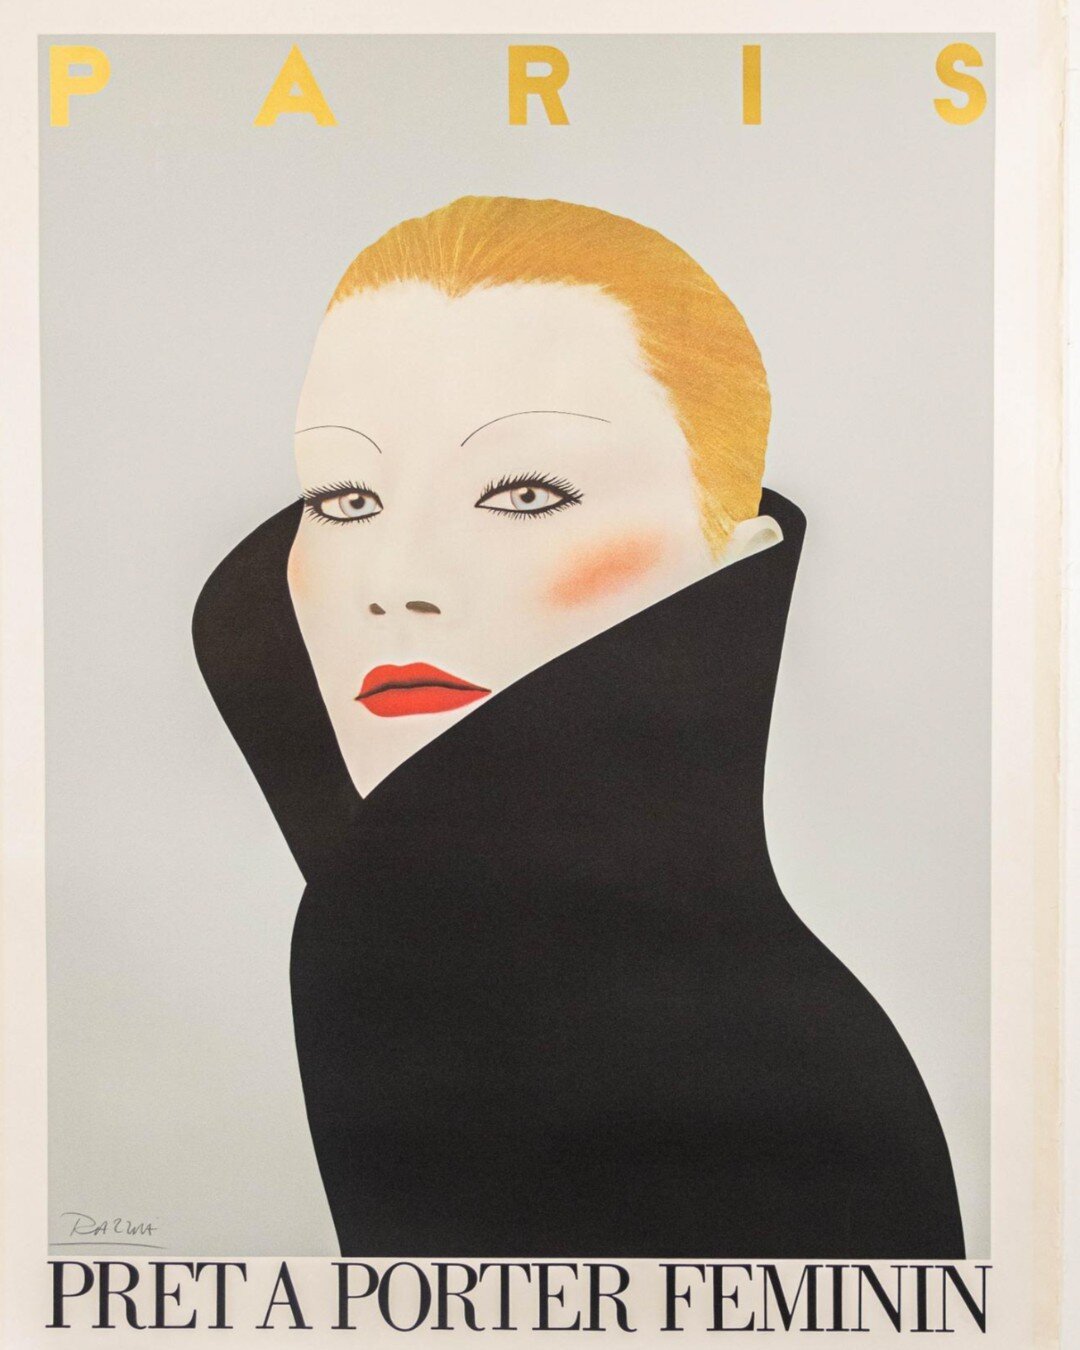 Razzia &quot;Preta Porter Feminin&quot; Poster on Canvas
This beautiful poster would make a room sing! Available for pre-bid this weekend only on liveauctioneers.com and invaluable.com.
.
.
.
.
.
.
.
.
#paris #mod #chic #vogue #razzia #glamour #art #